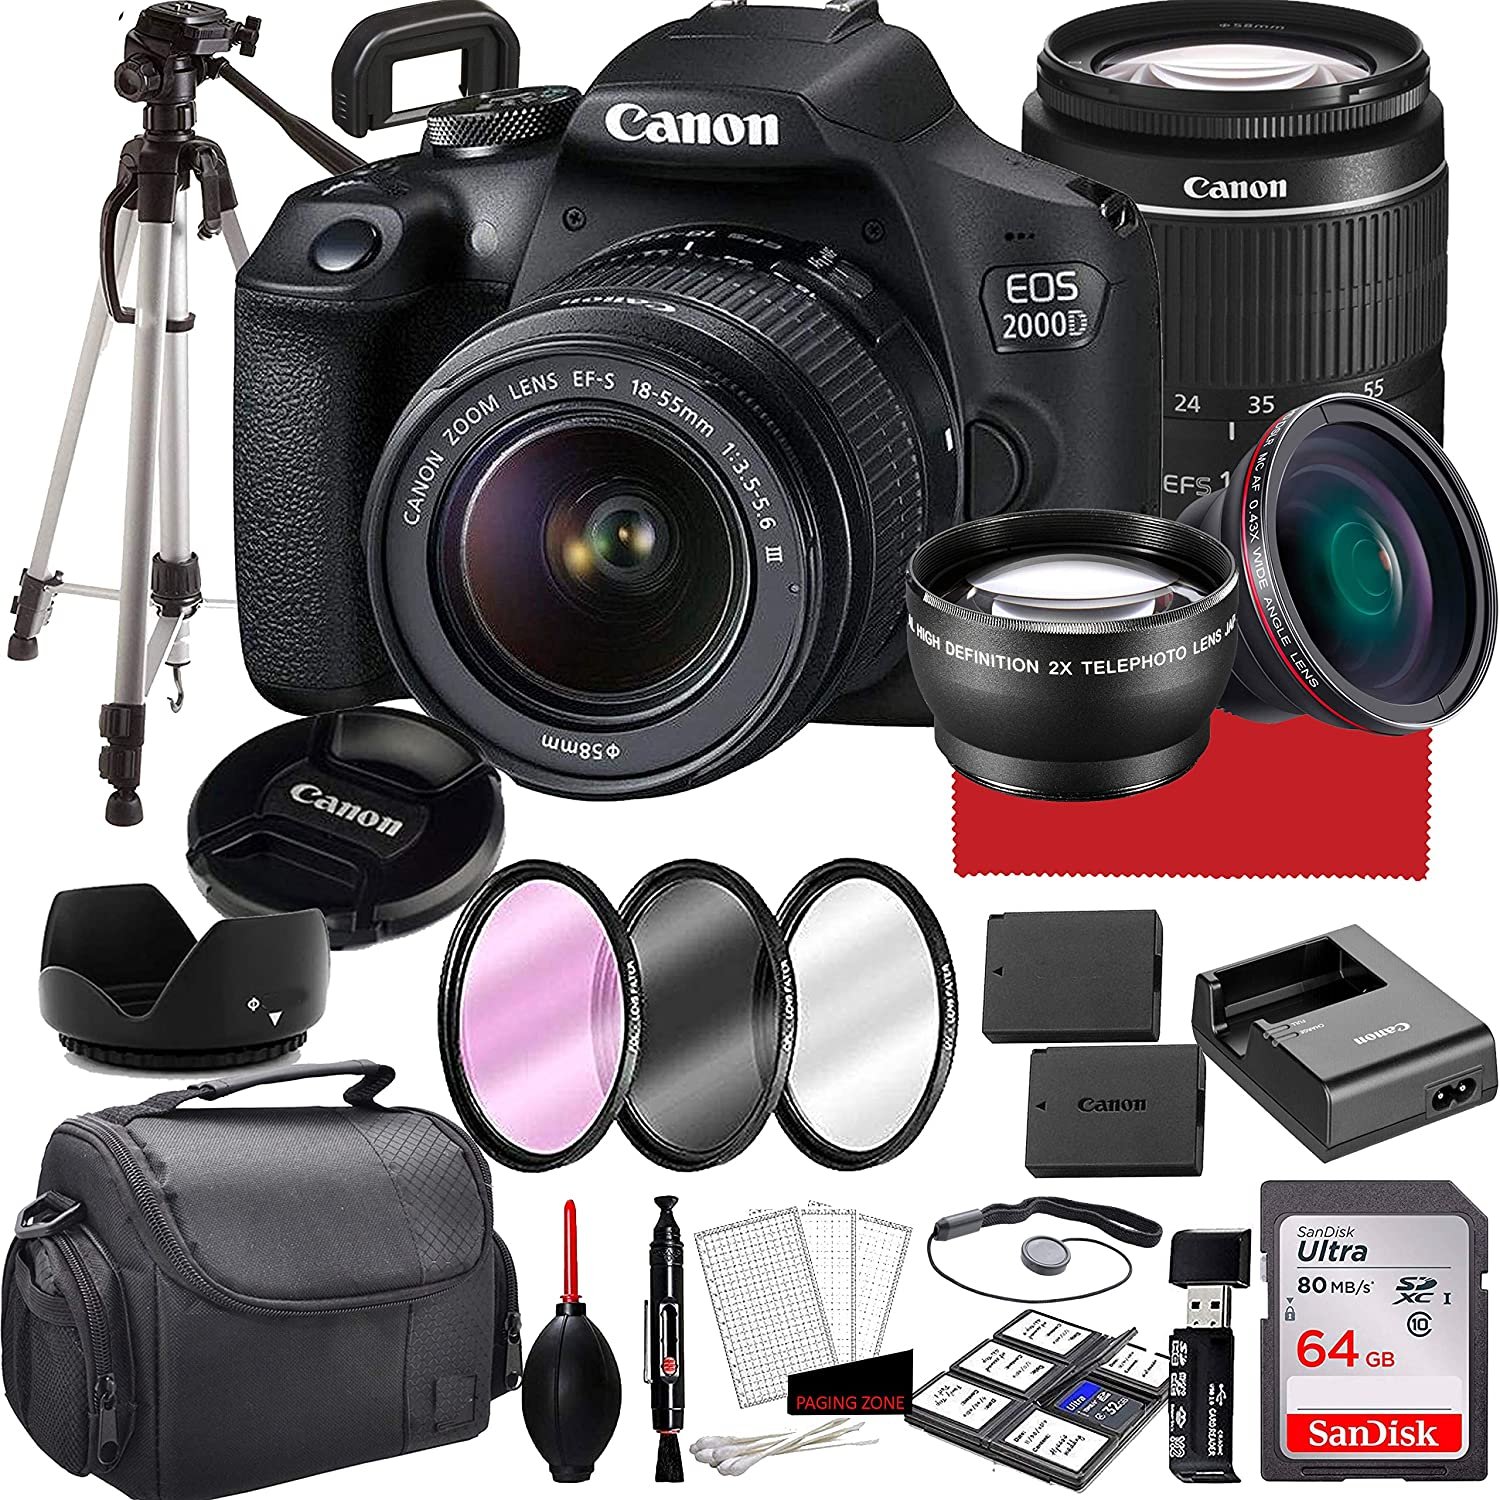 Canon EOS 2000D (Rebel T7) DSLR Camera with 18-55mm f/3.5-5.6 Zoom Lens, 64GB Memory,Case, Tripod and More (28pc Bundle) - image 1 of 8